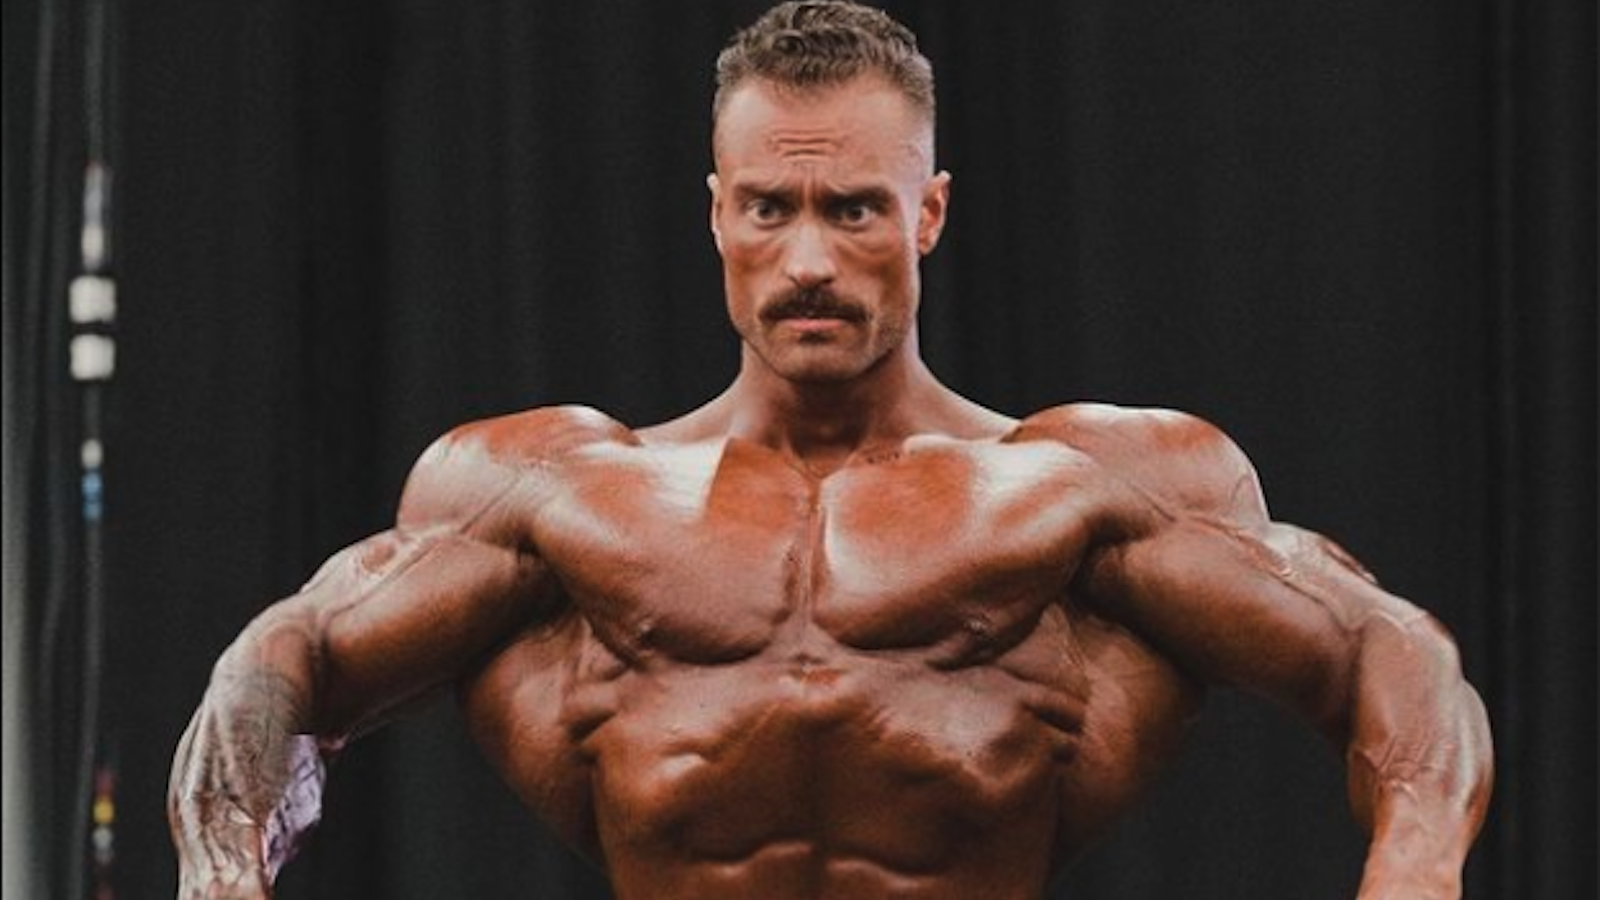 Here's Chris Bumstead's 3,508-Calorie Full Day of Eating to Start His  Off-Season Bulk | BarBend